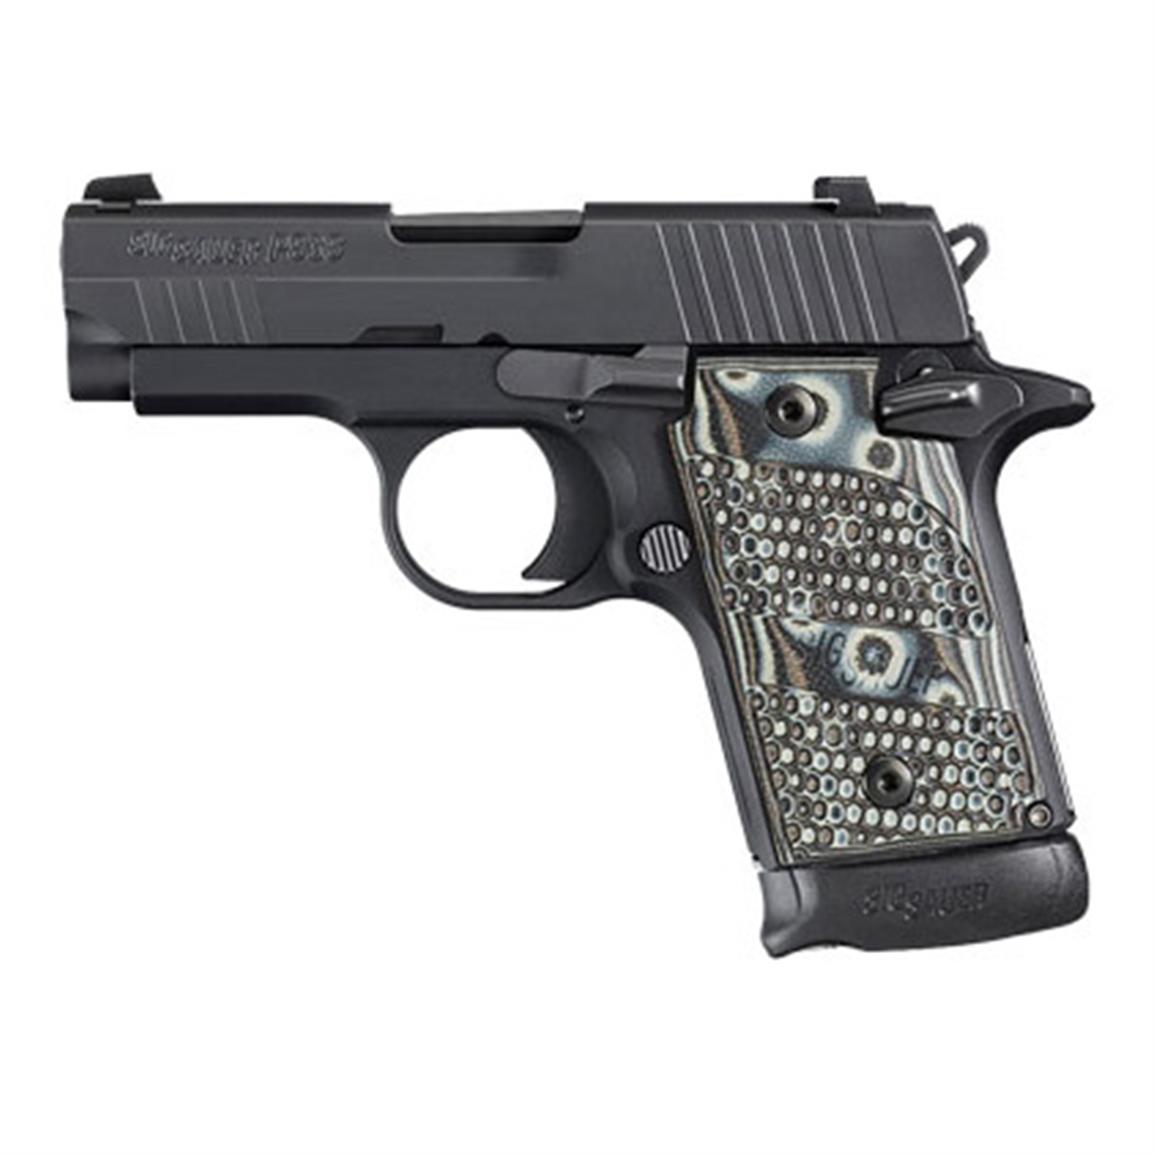 p365-9mm-manual-safety-3-12rd-mags-holster